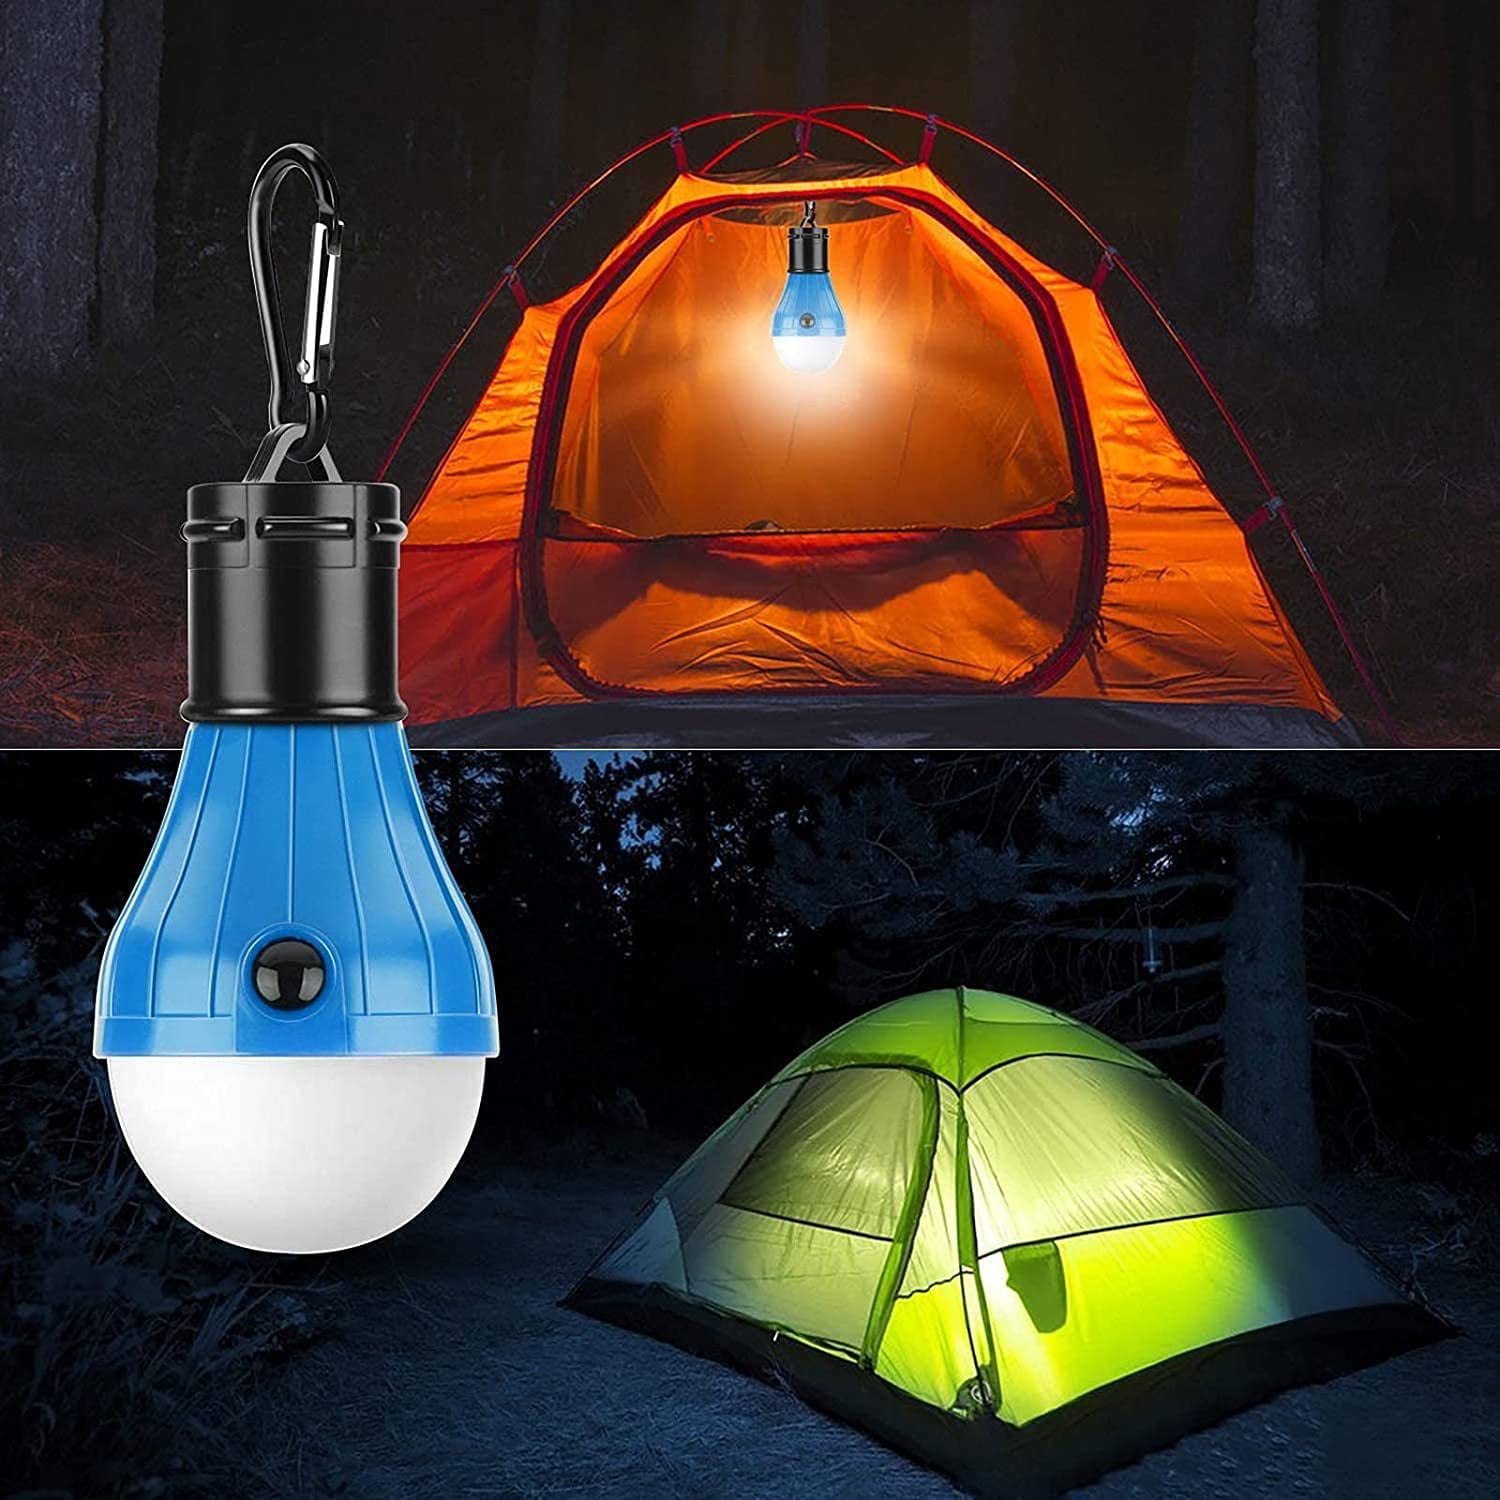 Dropship LED Camping Light, 12V 10000 Lumen Super Bright Portable Outdoor  Lights With Telescoping Pole Suction Cup Magnetic Base, Flood Lamp For  Outdoors Camp, Fishing, Picnic, BBQ, Power Failure to Sell Online